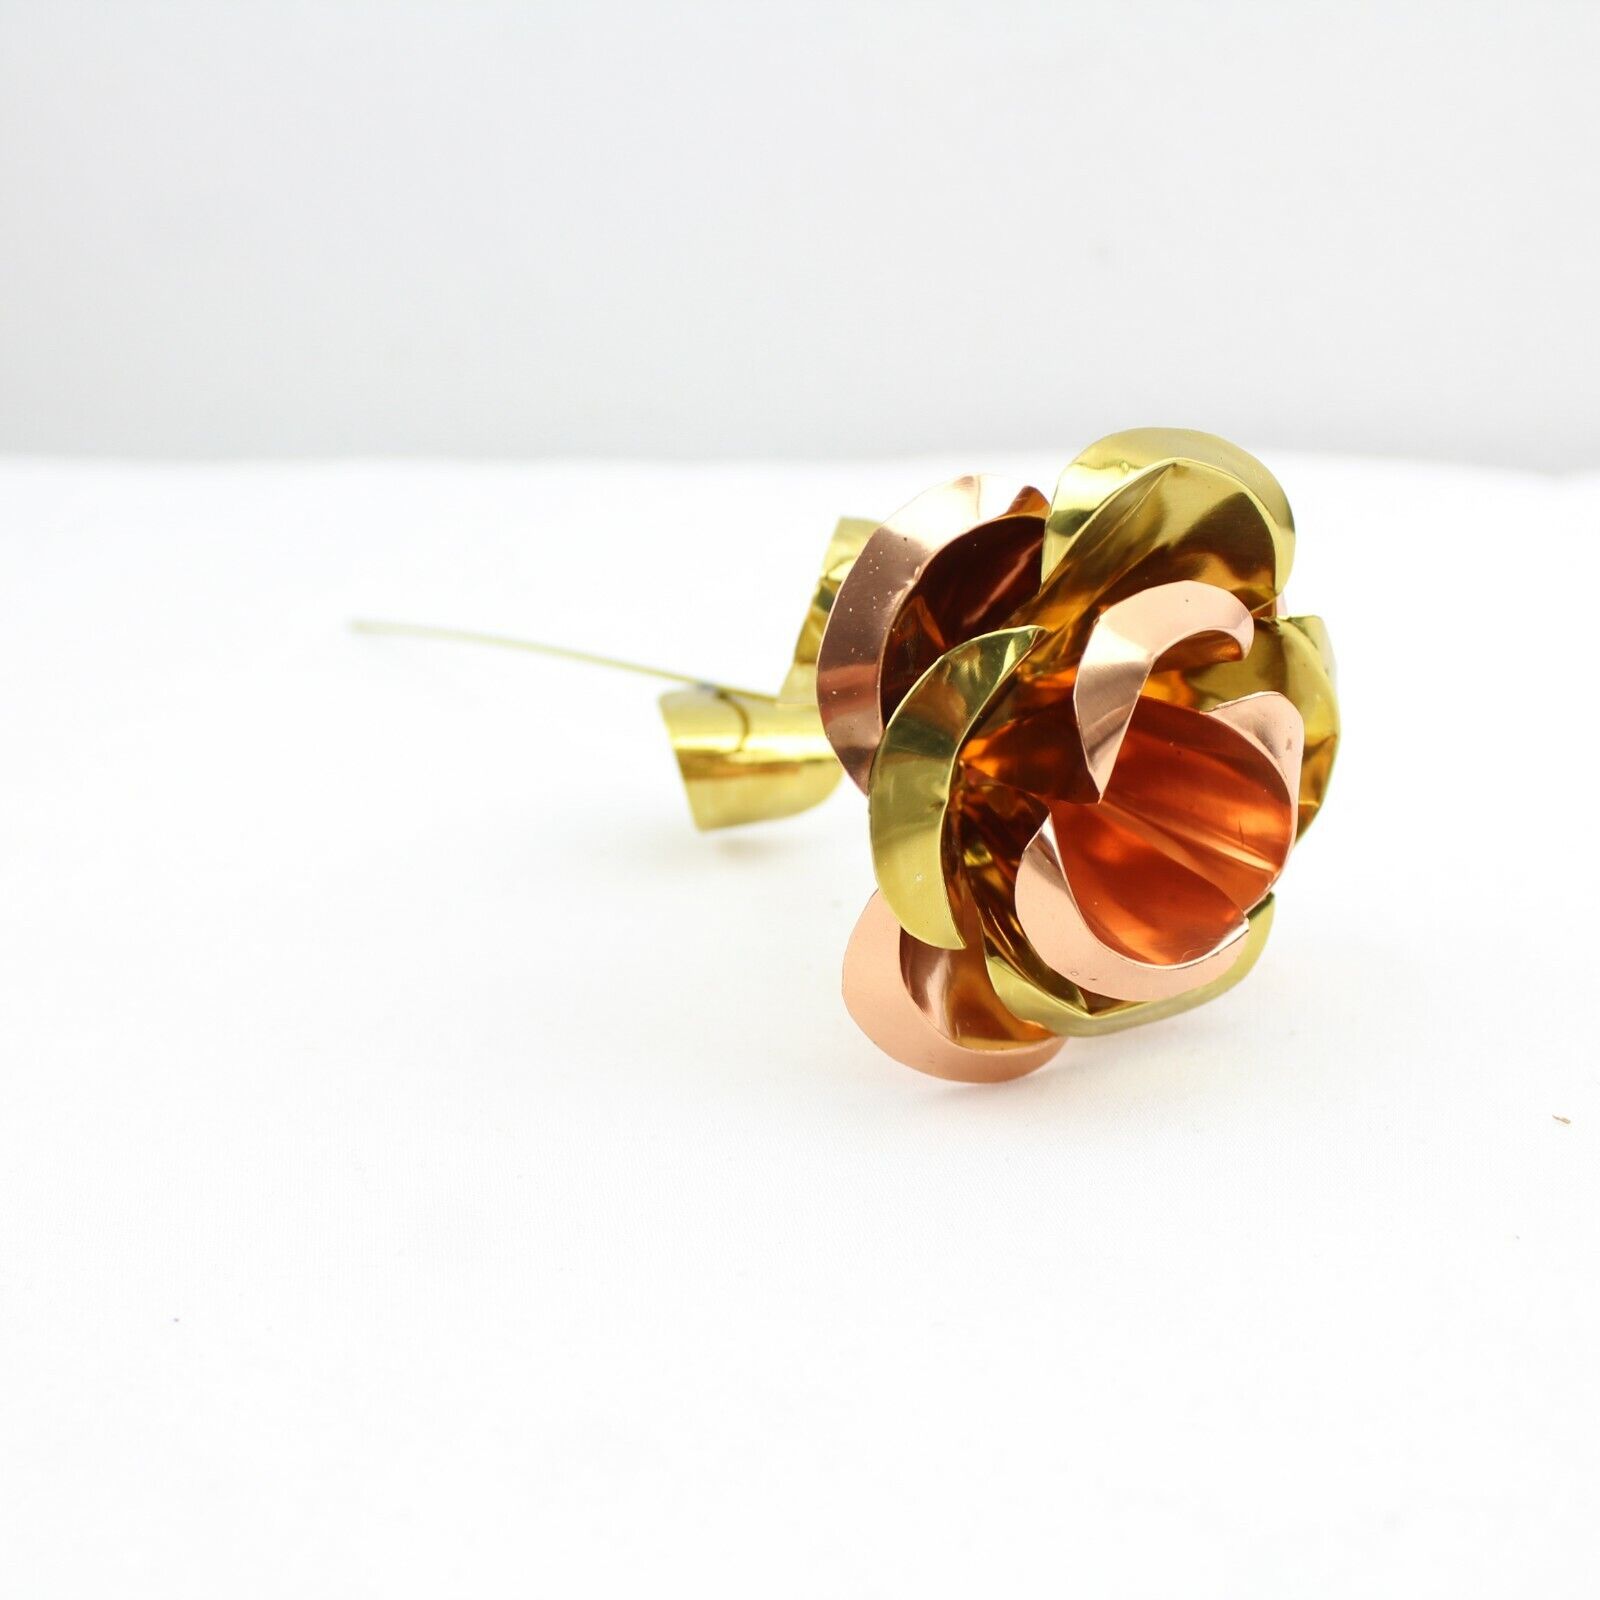 Real Copper Brass Rose Beautiful 8 Inch Cobre Handcrafted Any Occasion Gift